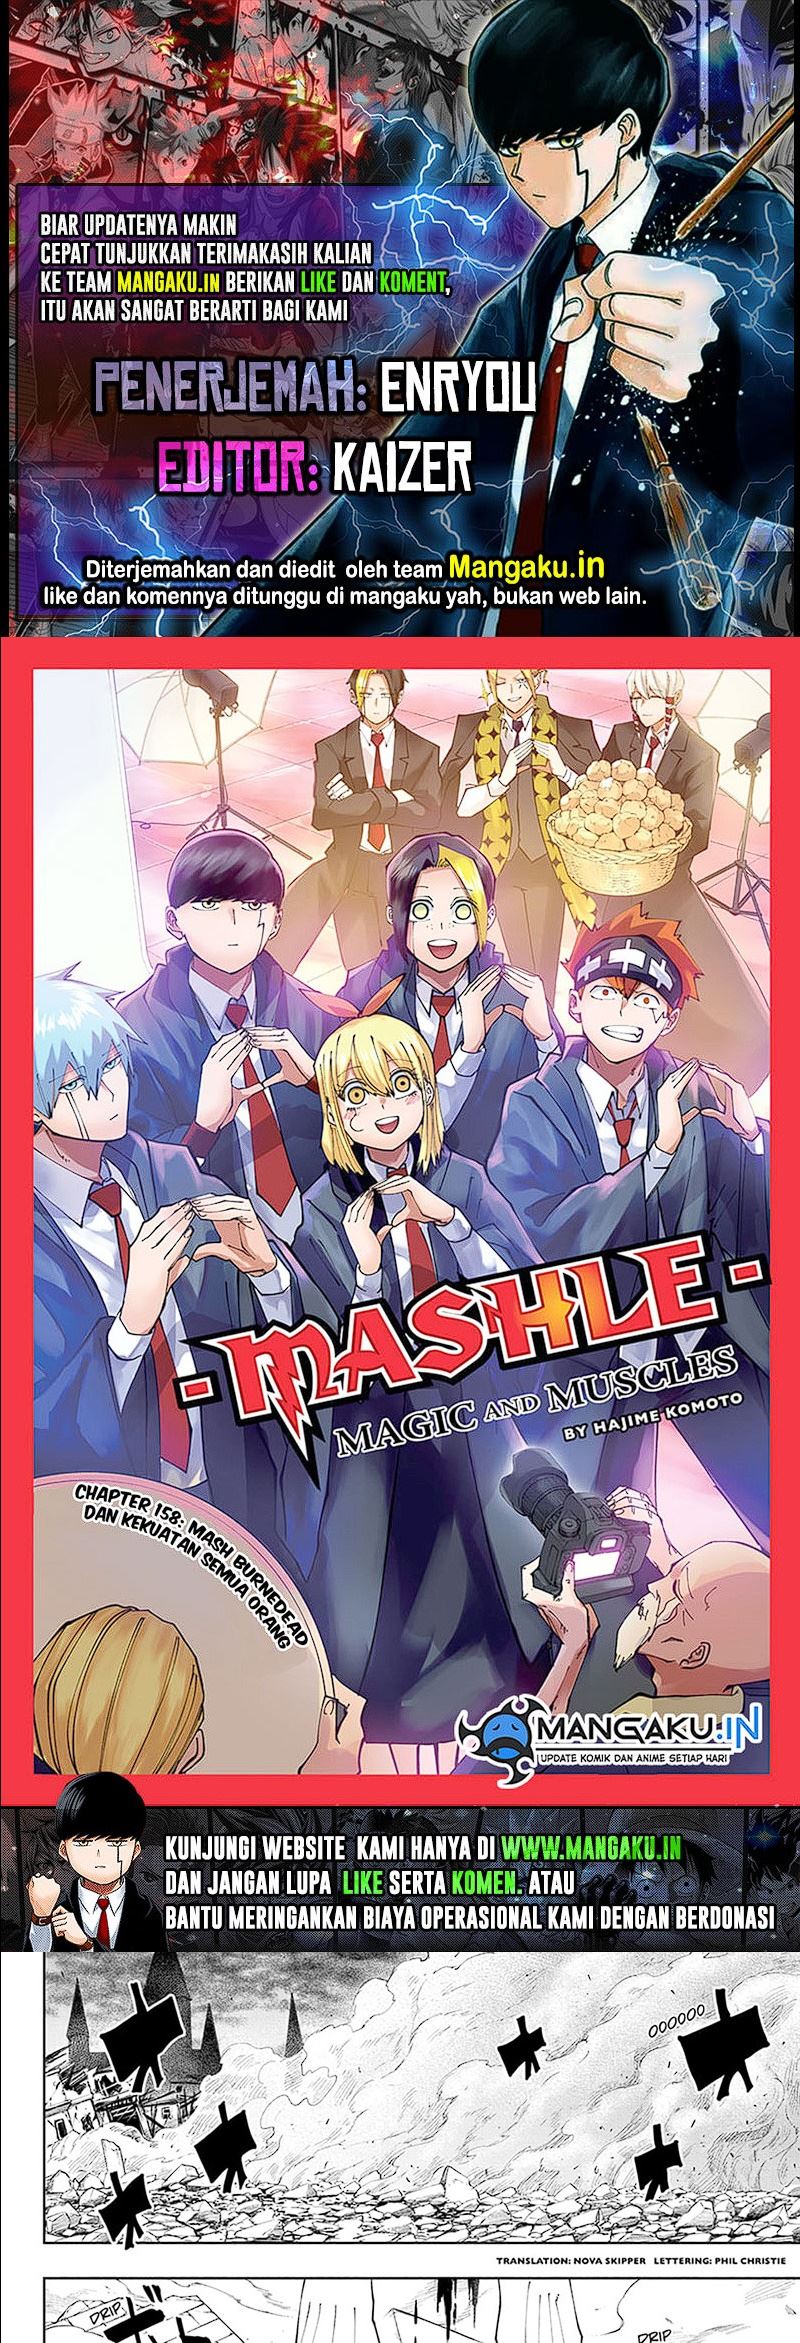 Mashle: Magic And Muscles Chapter 158 - 67